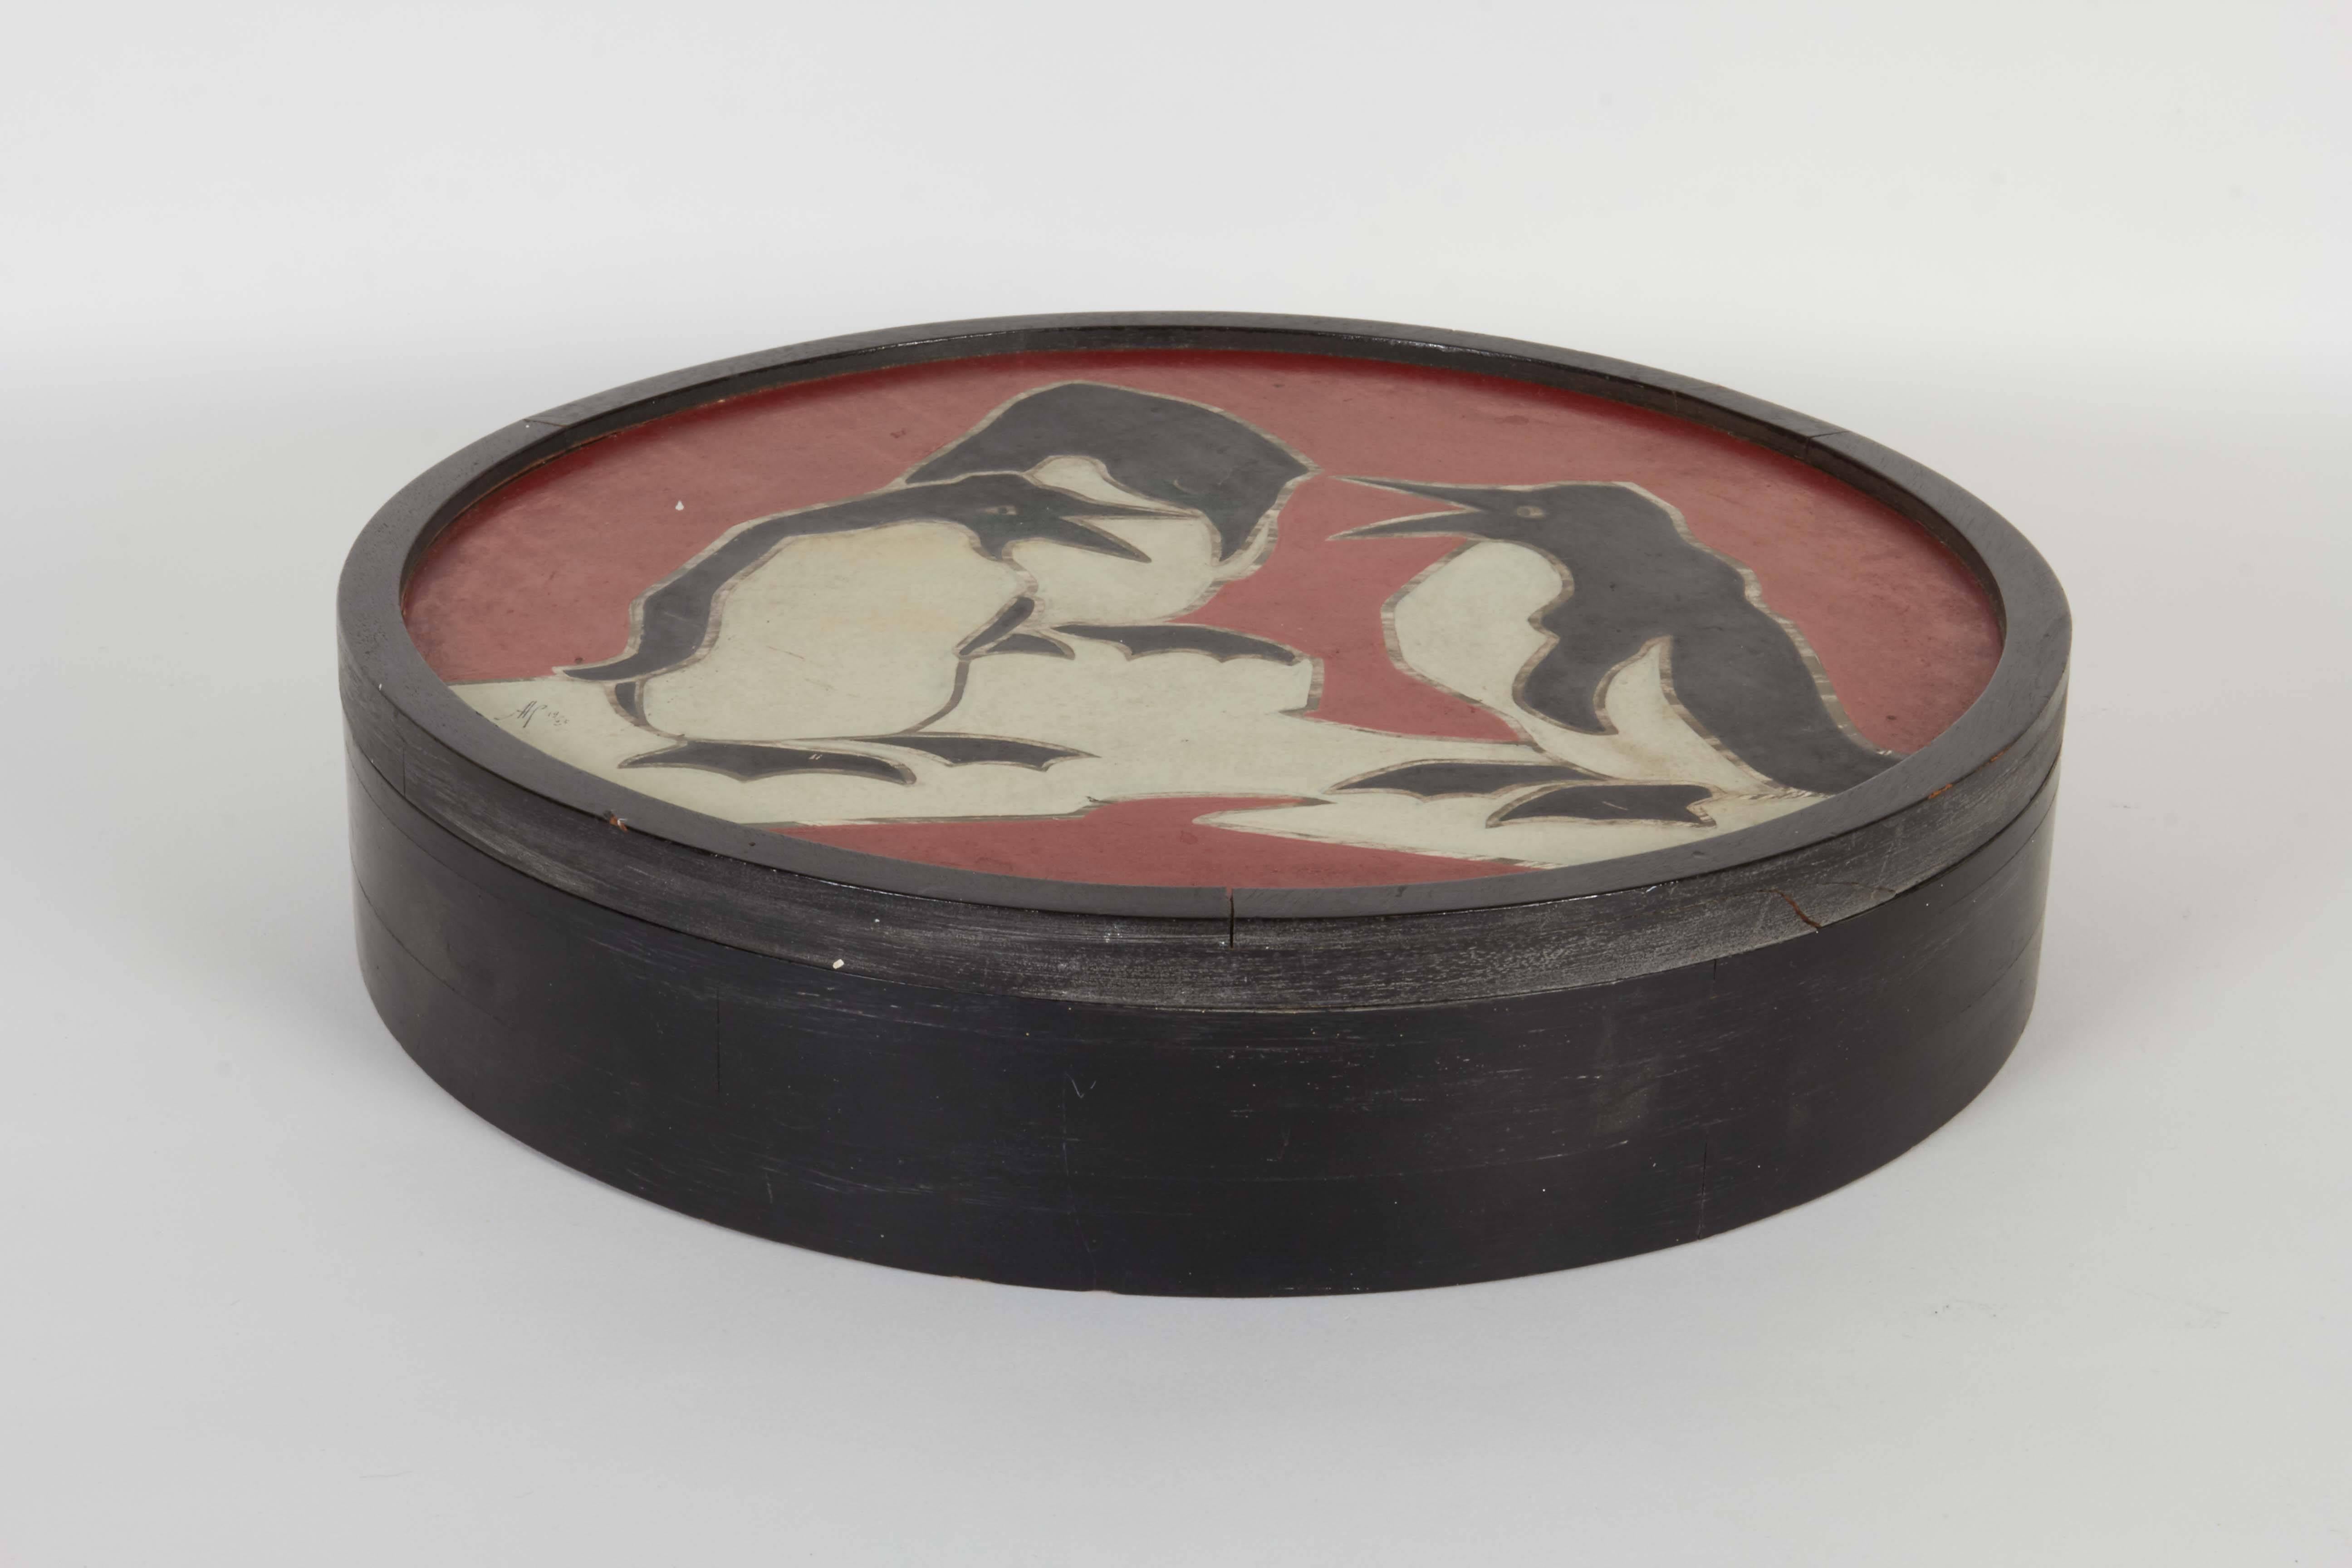 20th Century French Art Deco Round Box with Penguins